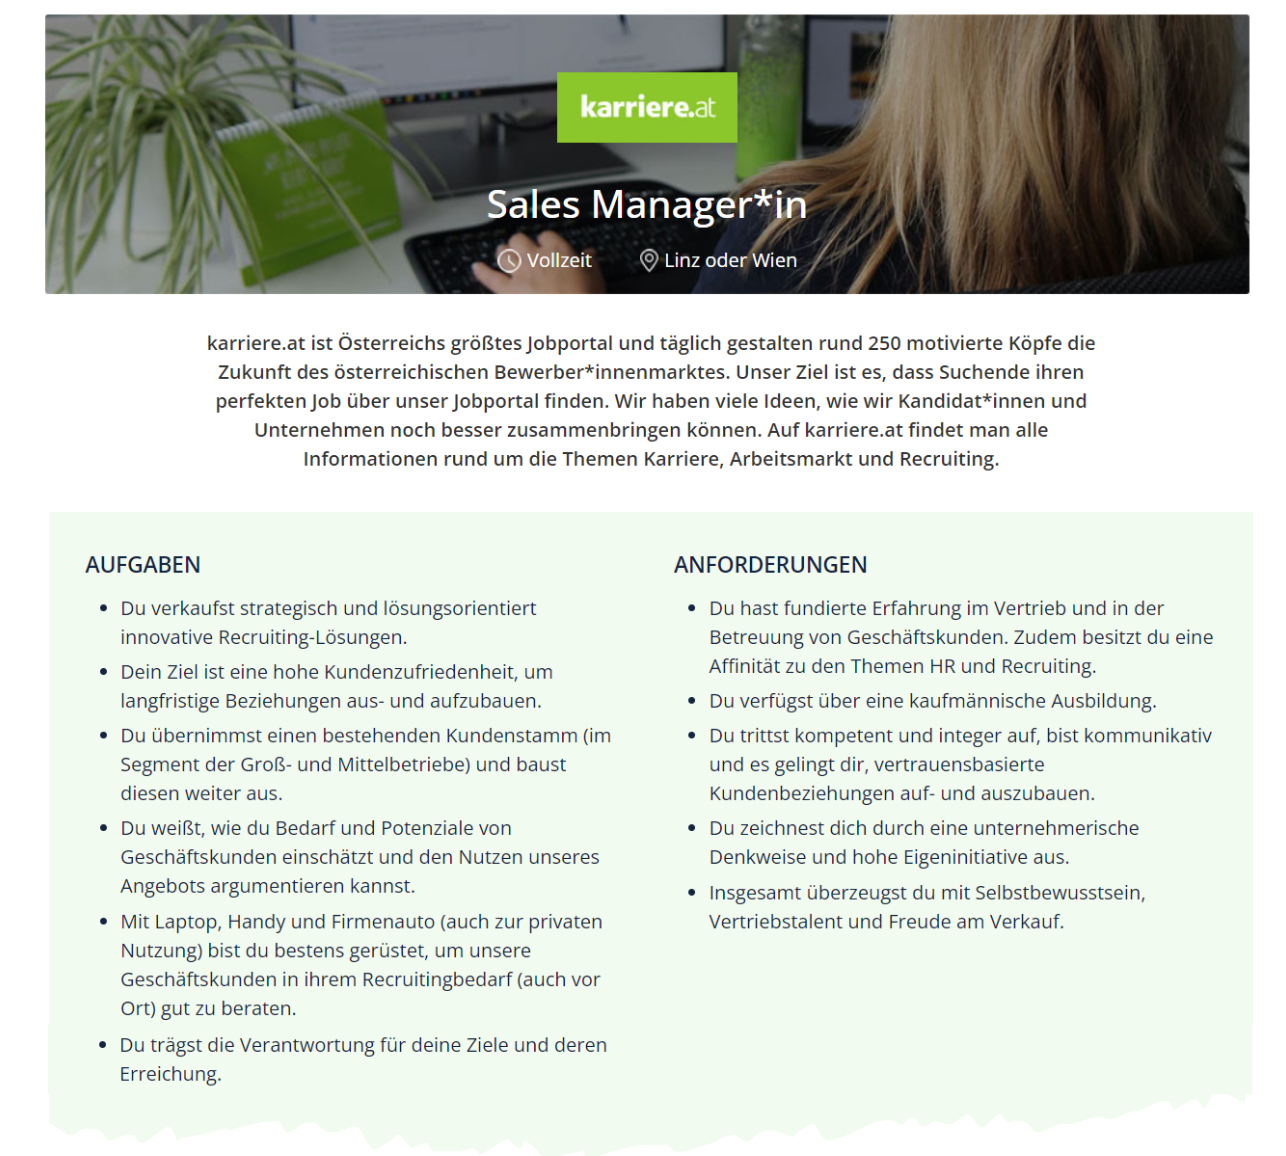 Sales Manager*in